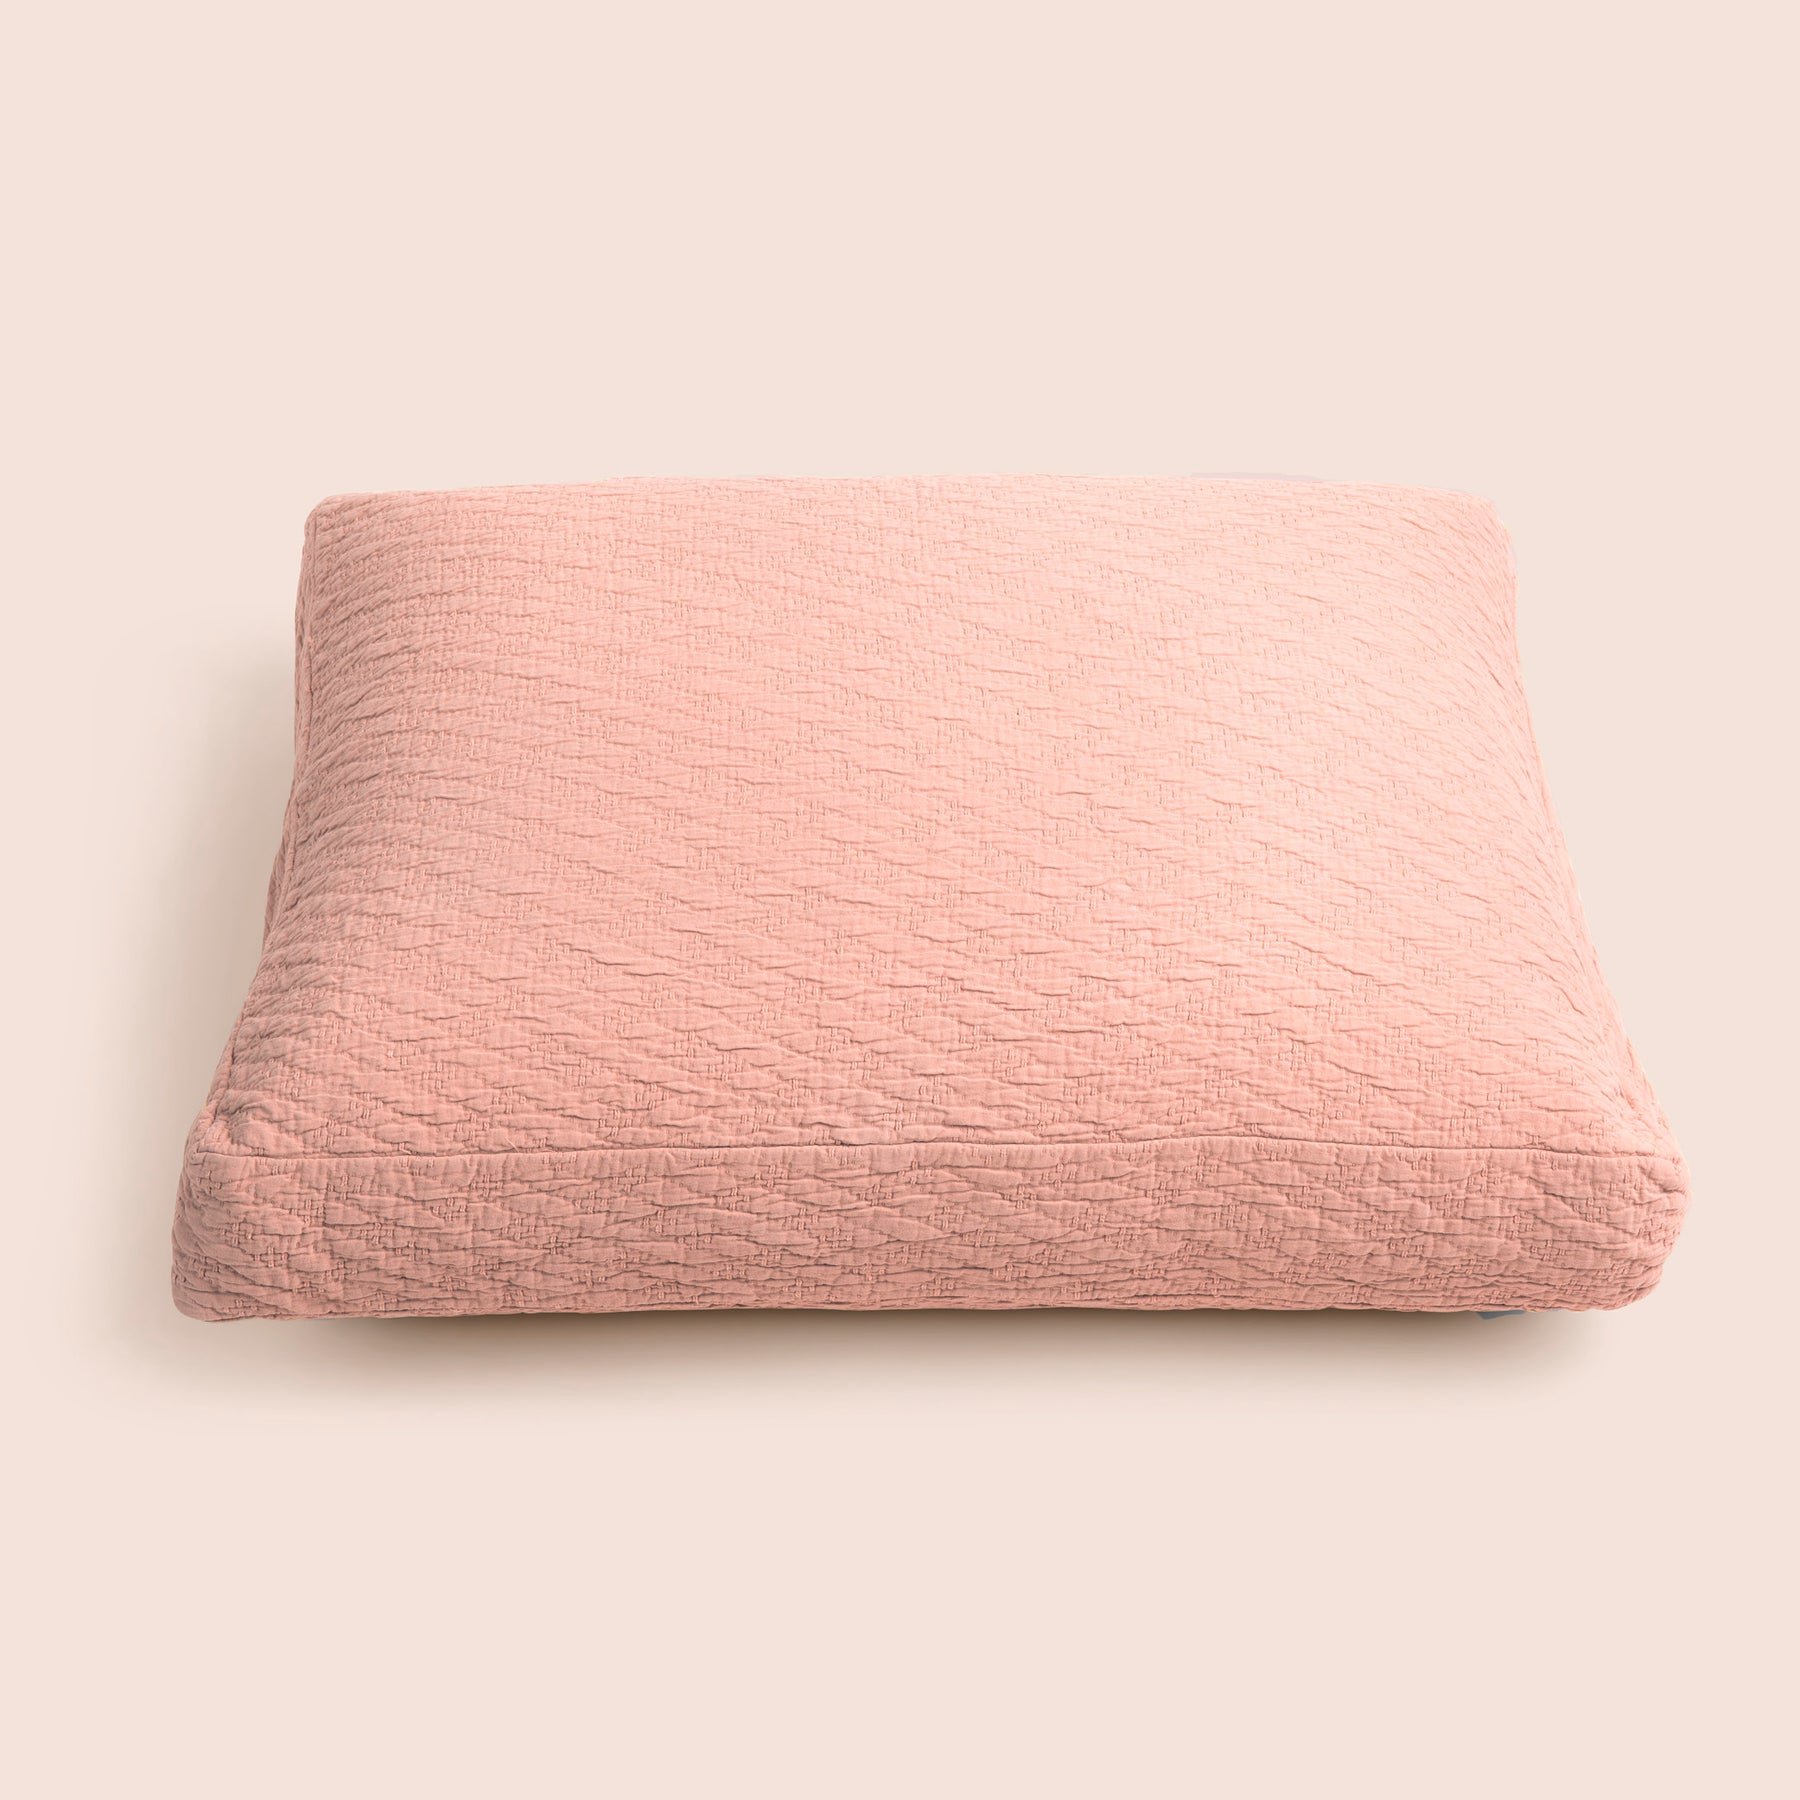 Image of the Pink Sandstone Wave Meditation Cushion Cover on a meditation cushion with a light pink background